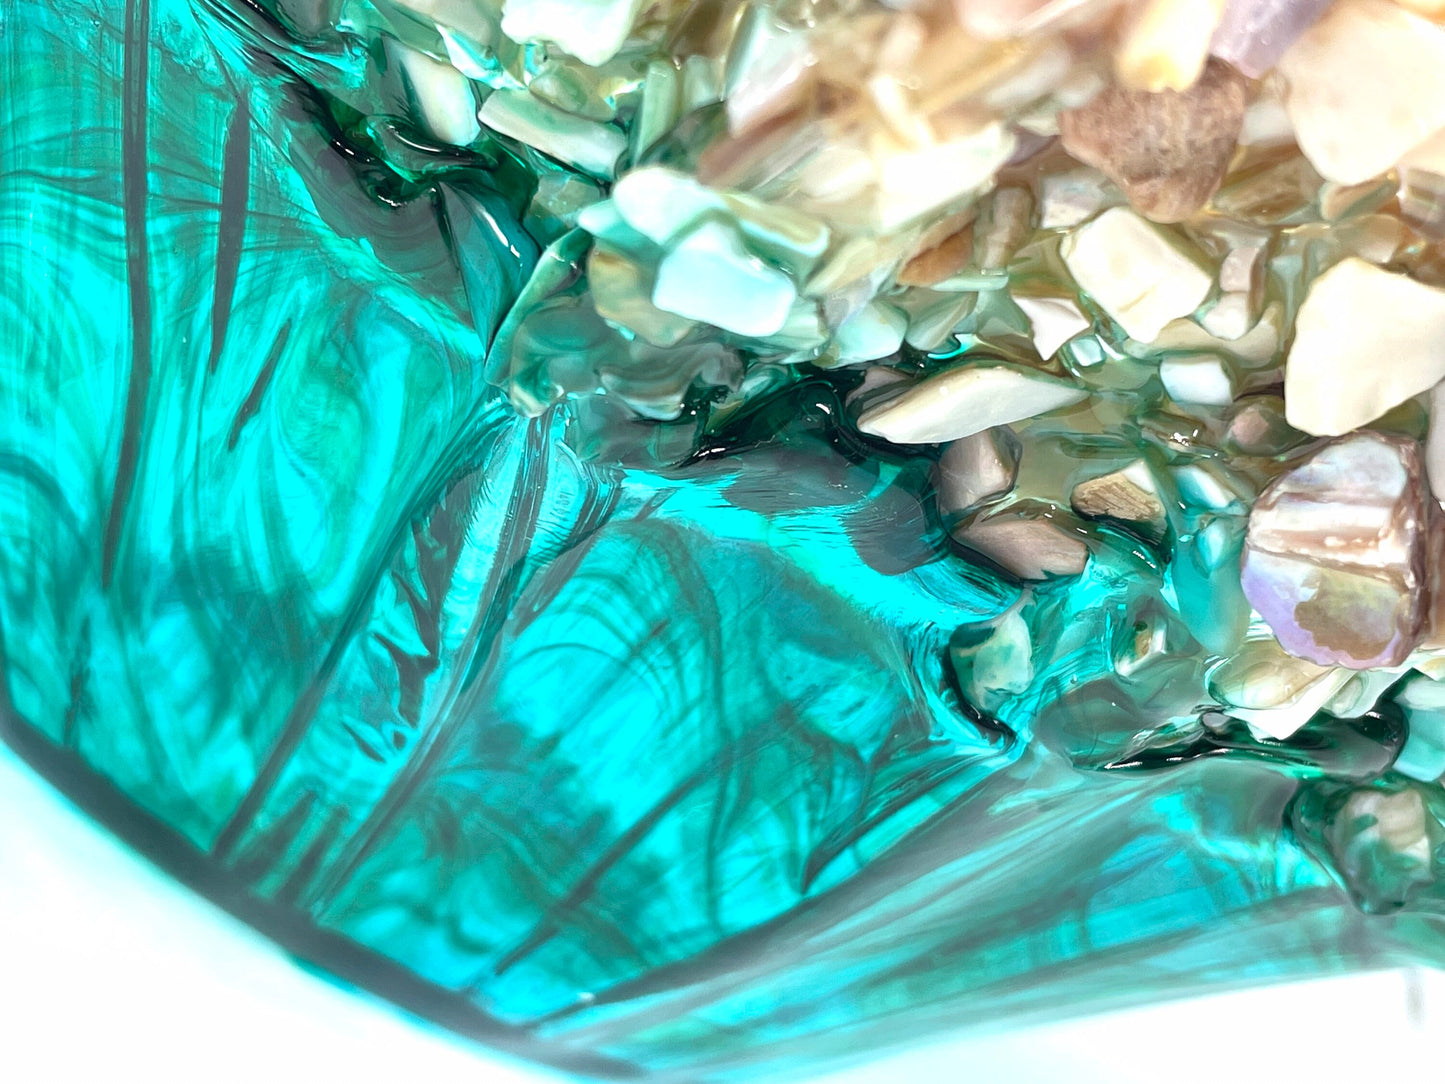 Ocean Green and Turquoise Swirled Resin and Crushed Shell Decorative Bowl MADE TO ORDER